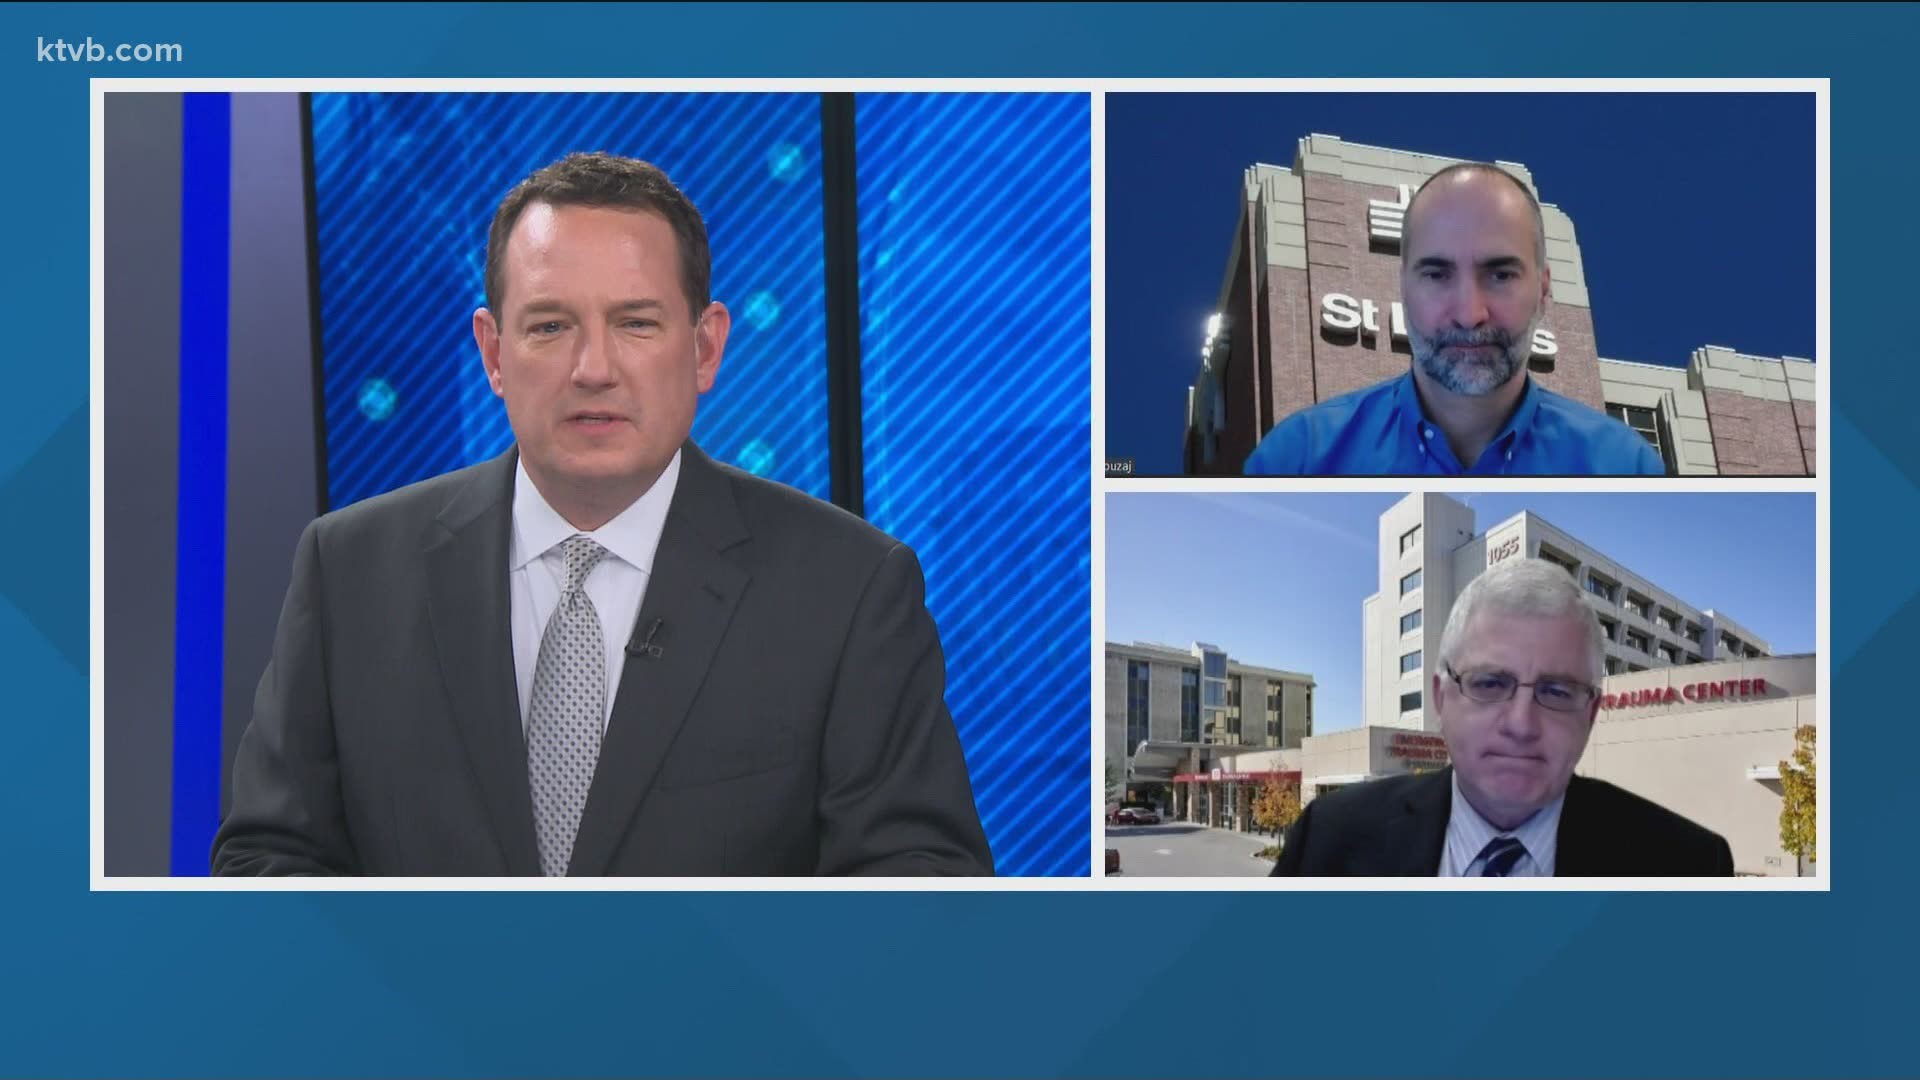 Medical leaders from Saint Alphonsus and St. Luke's recently sat down with our Doug Petcash to talk about the importance of the vaccine rollout here in Idaho.